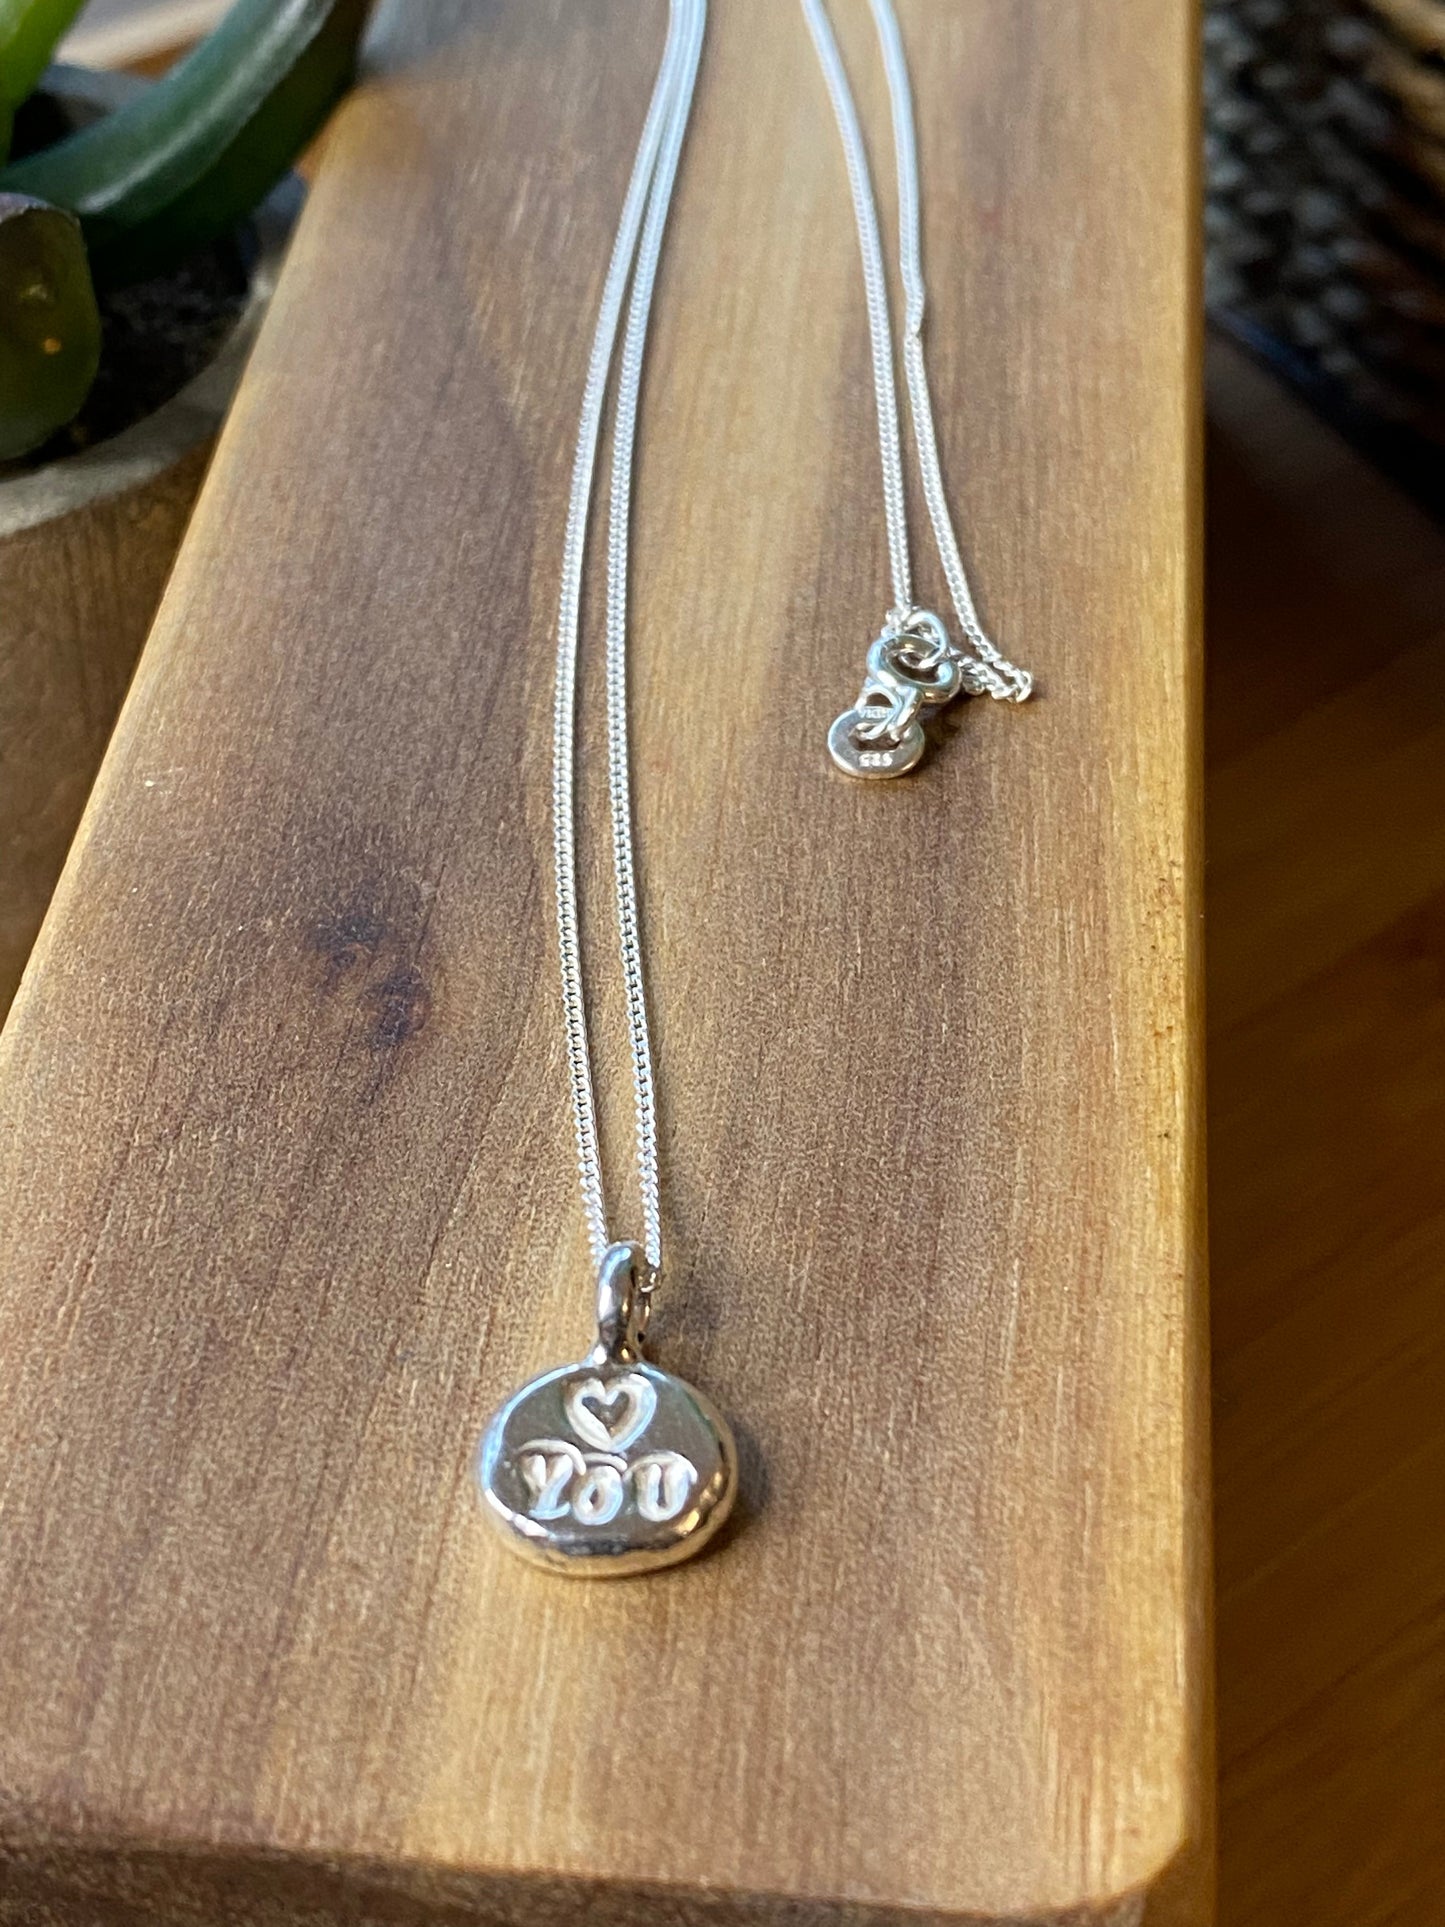 Necklace - 16” Sterling Silver Heart You Pendant on a Sterling Silver Chain